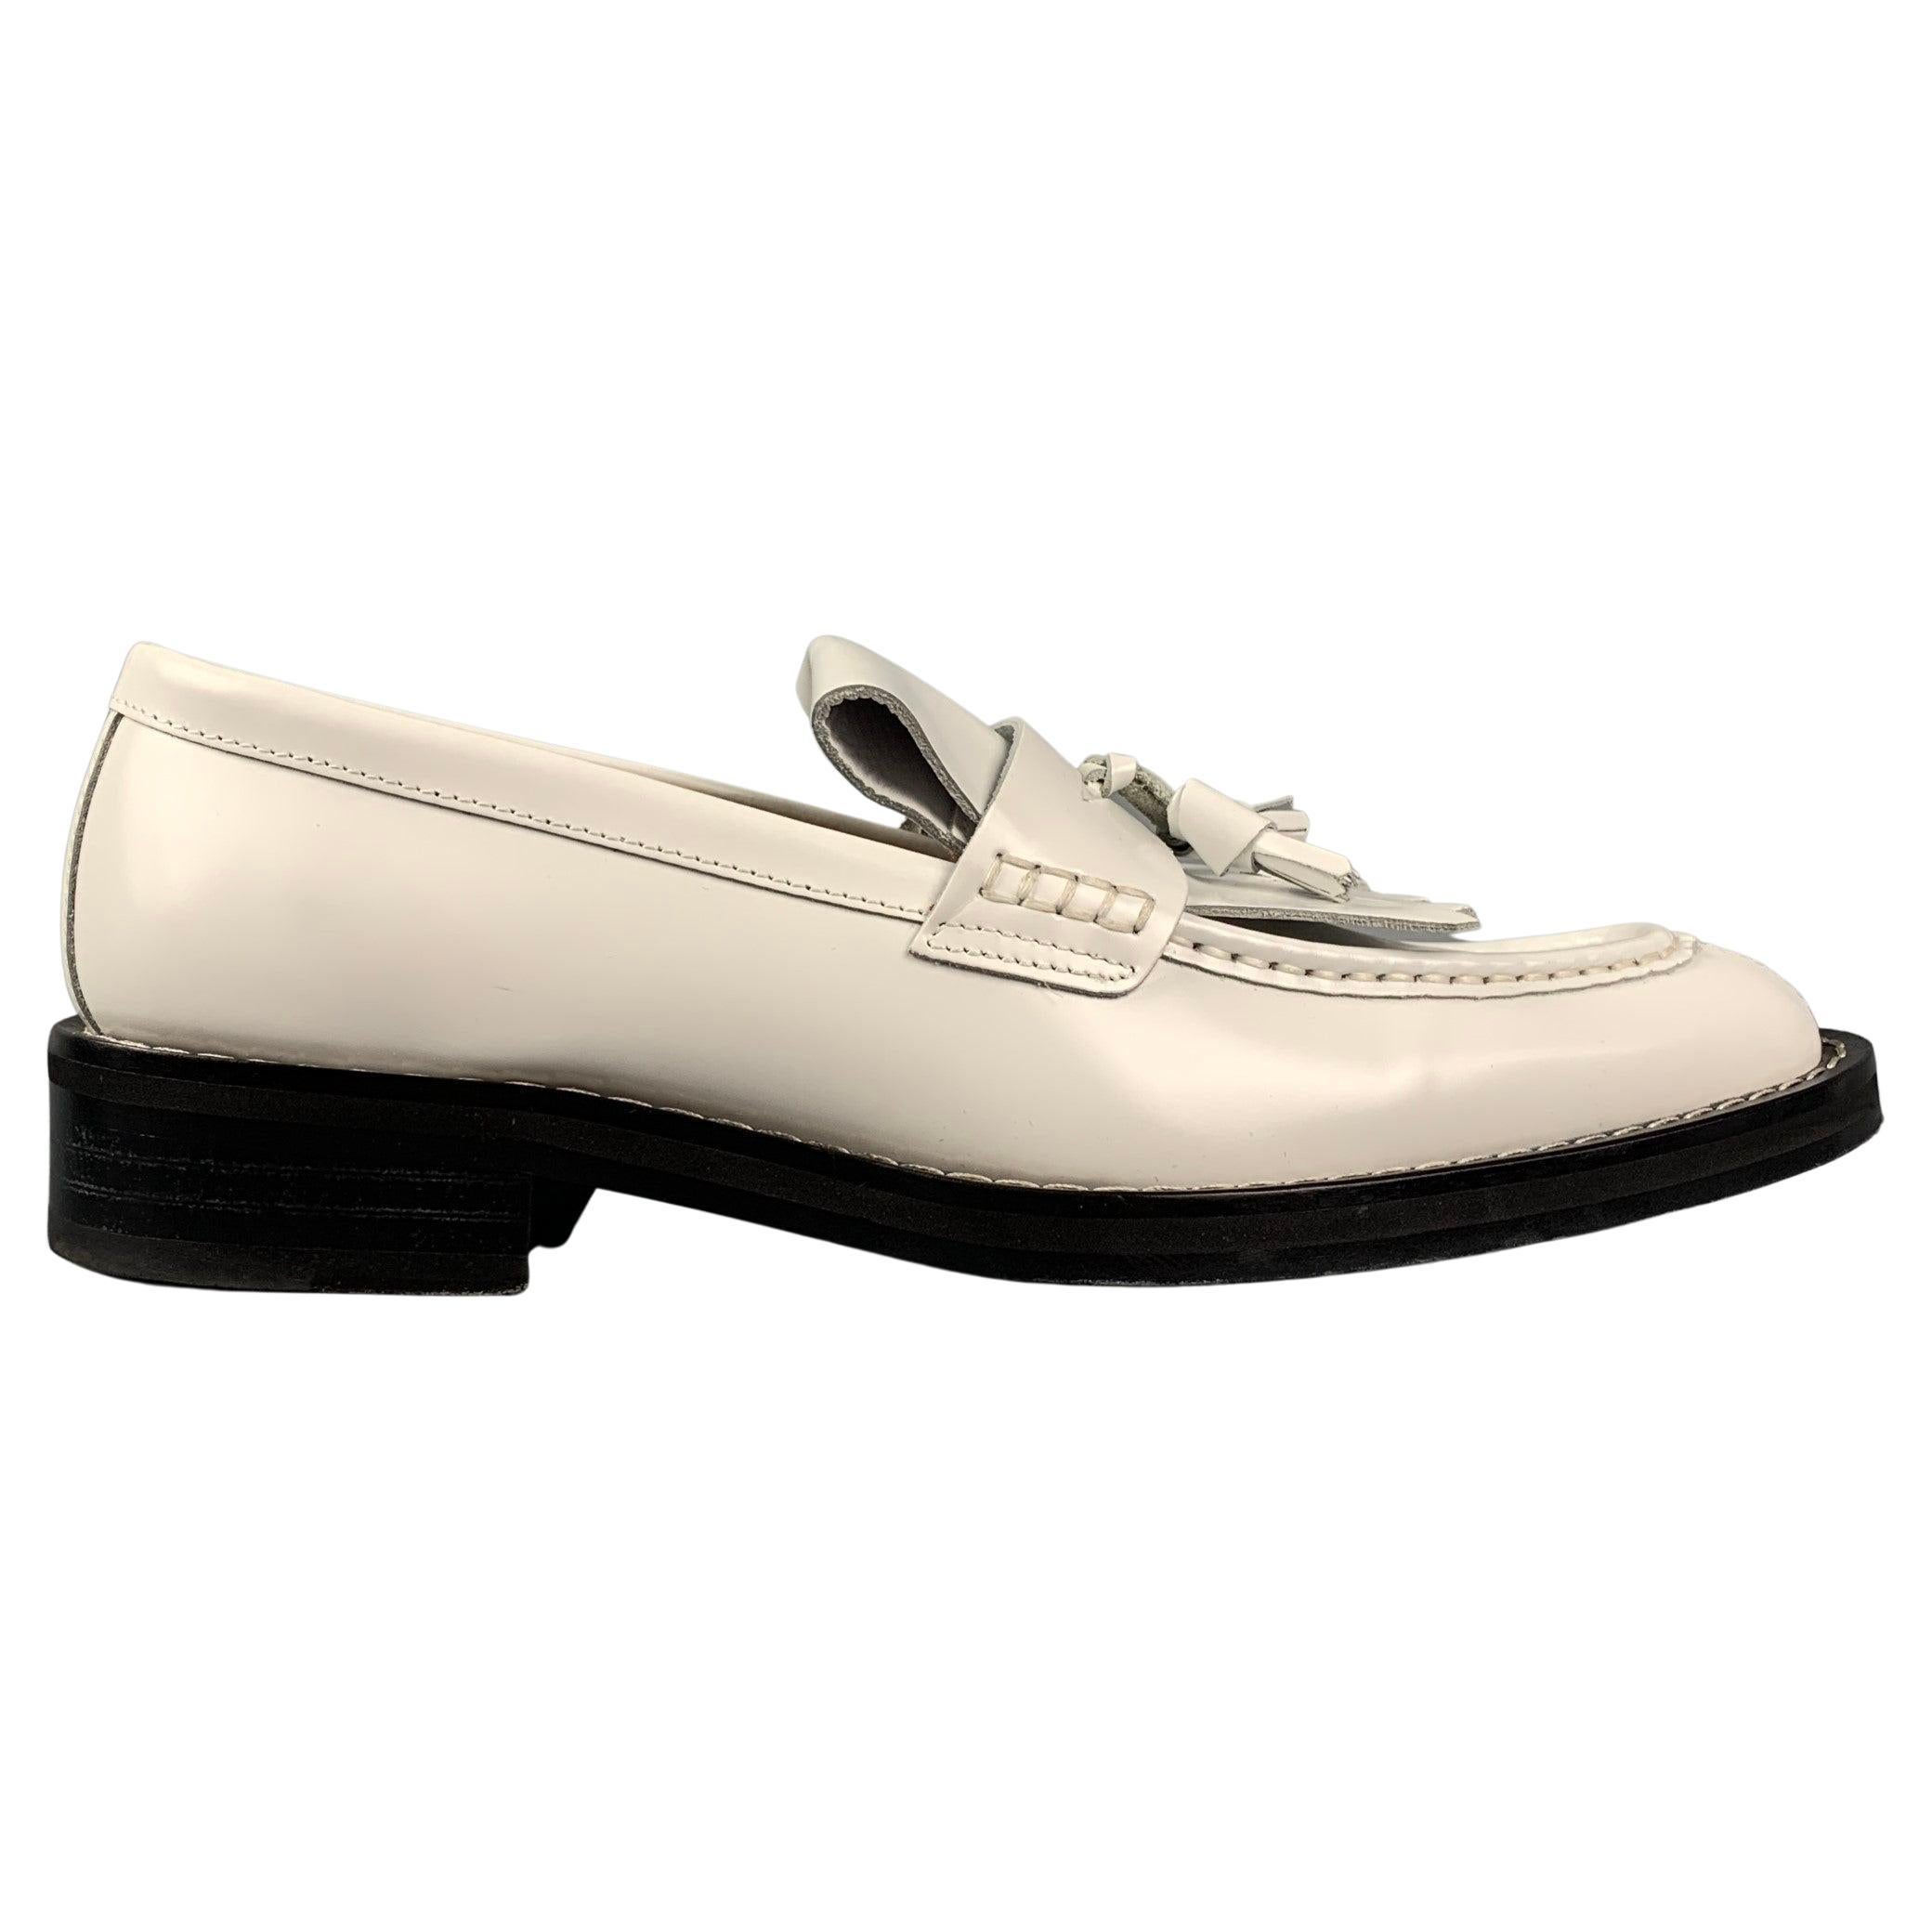 AMI by ALEXANDRE MATTIUSSI Size 9 White Leather Tassels Spazzo Moccasin Loafers